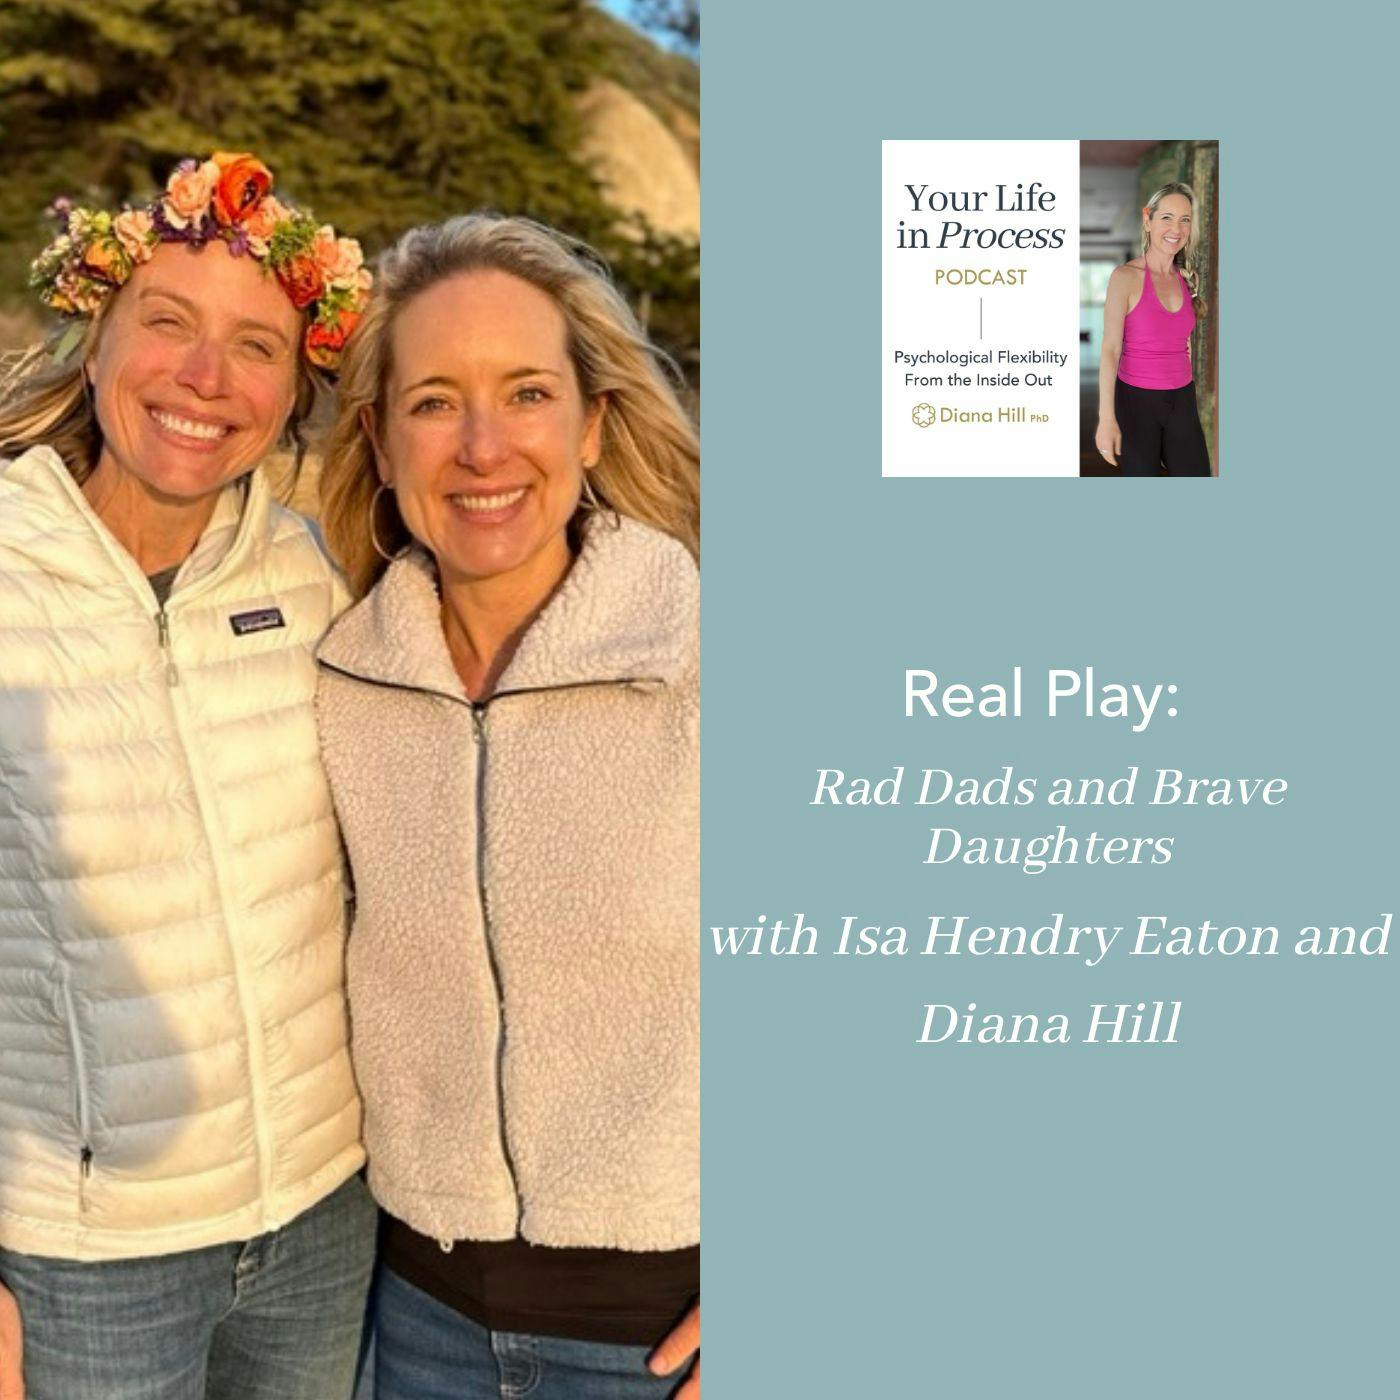 Real Play: Rad Dads and Brave Daughters with Isa Hendry Eaton and Diana Hill